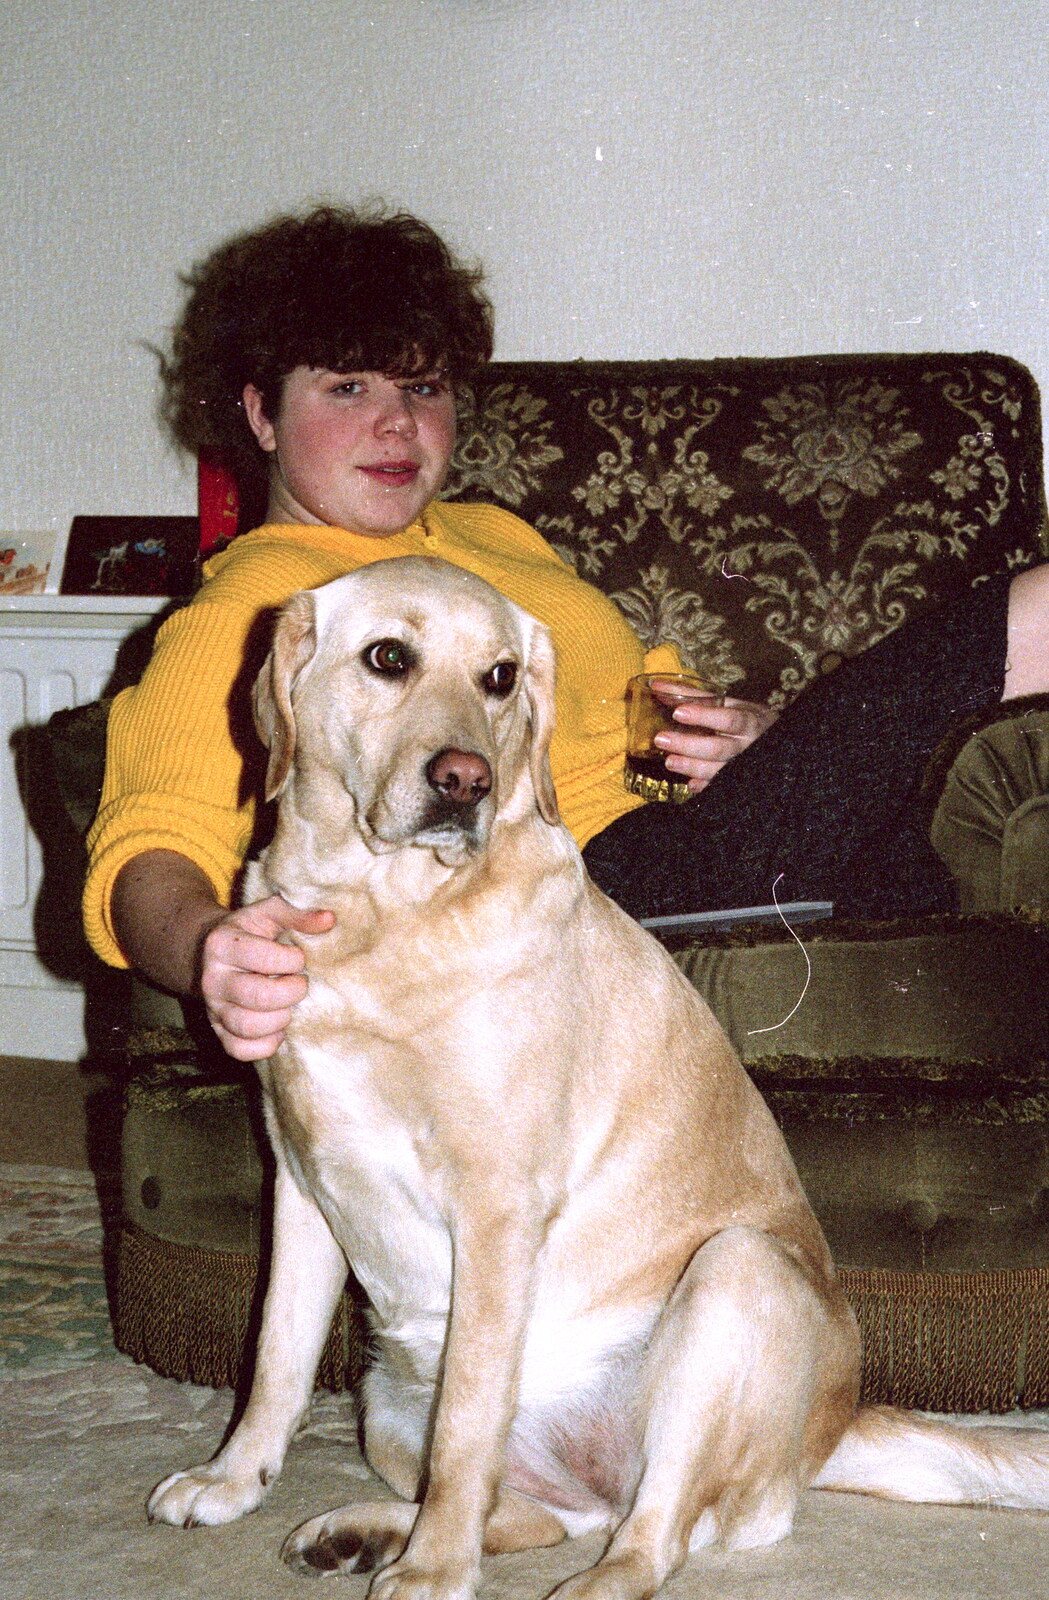 Sis and Brandy from Christmas in Macclesfield and Wetherby, Cheshire  and Yorkshire - 25th December 1985